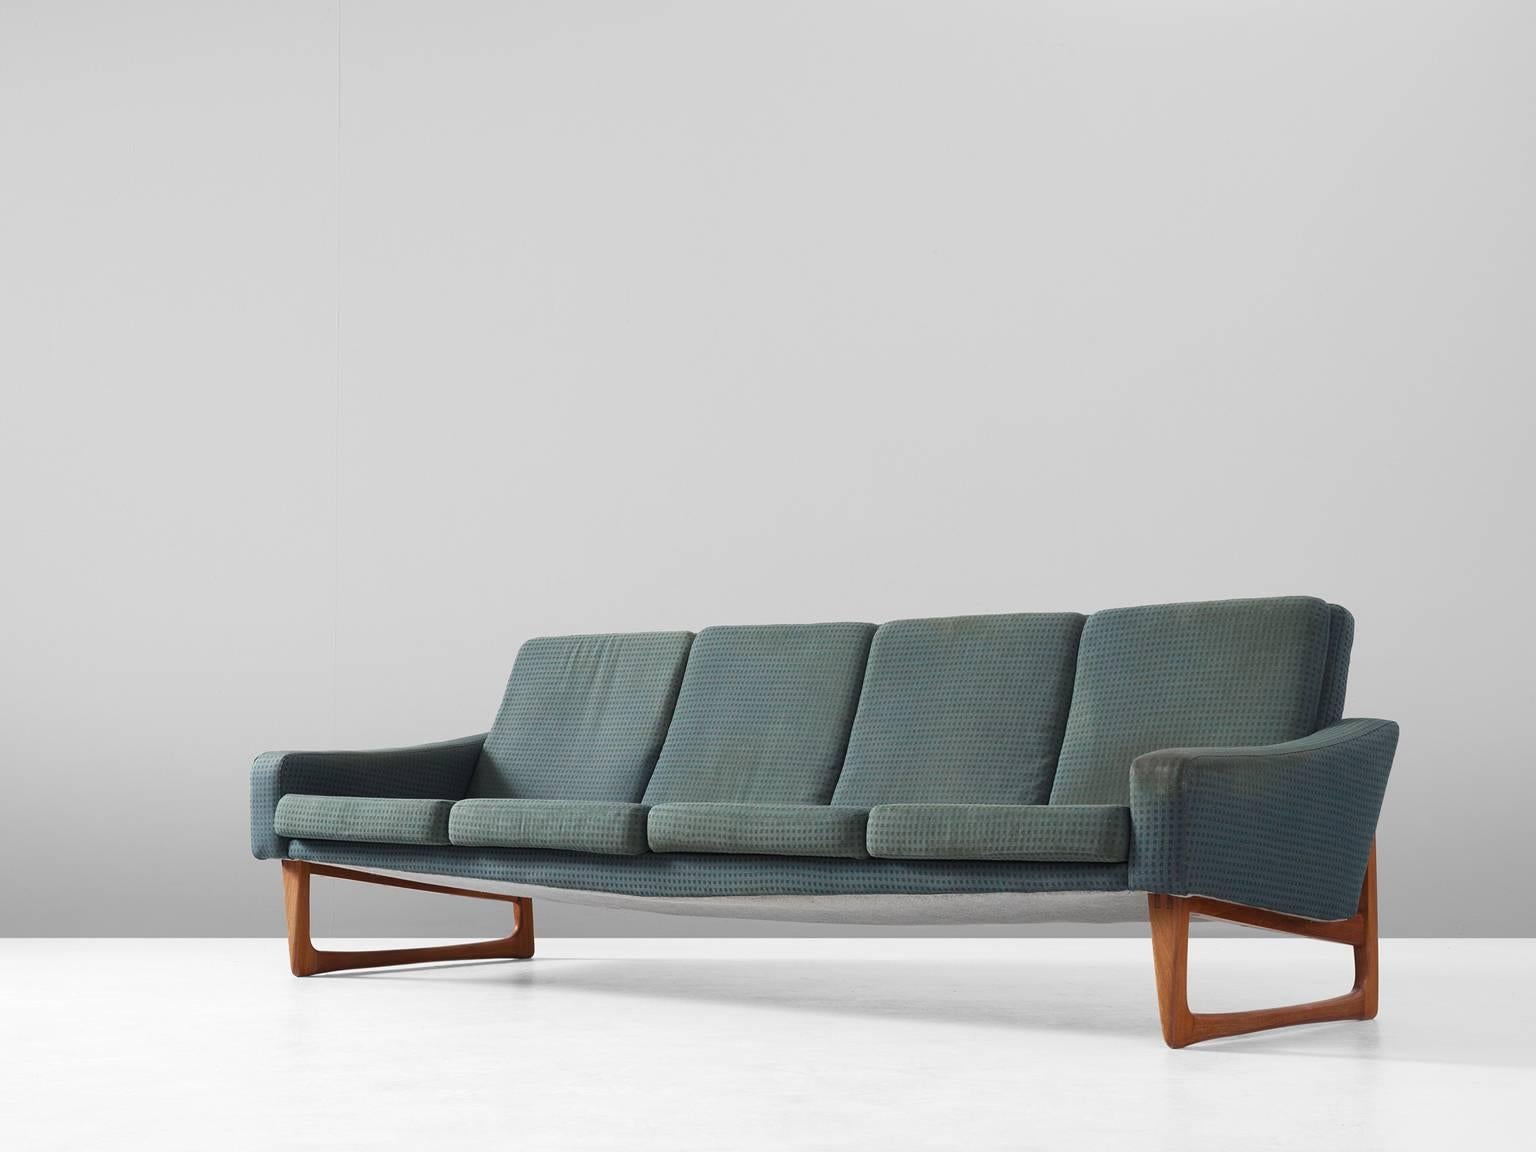 Four-seat sofa, in teak and fabric, Scandinavia, 1960s.

Large four-seat sofa with beautiful detailed teak frame. The frame has characteristic sled legs with rounded edges and diagonal cross connections. By their high and open legs, the large sofa